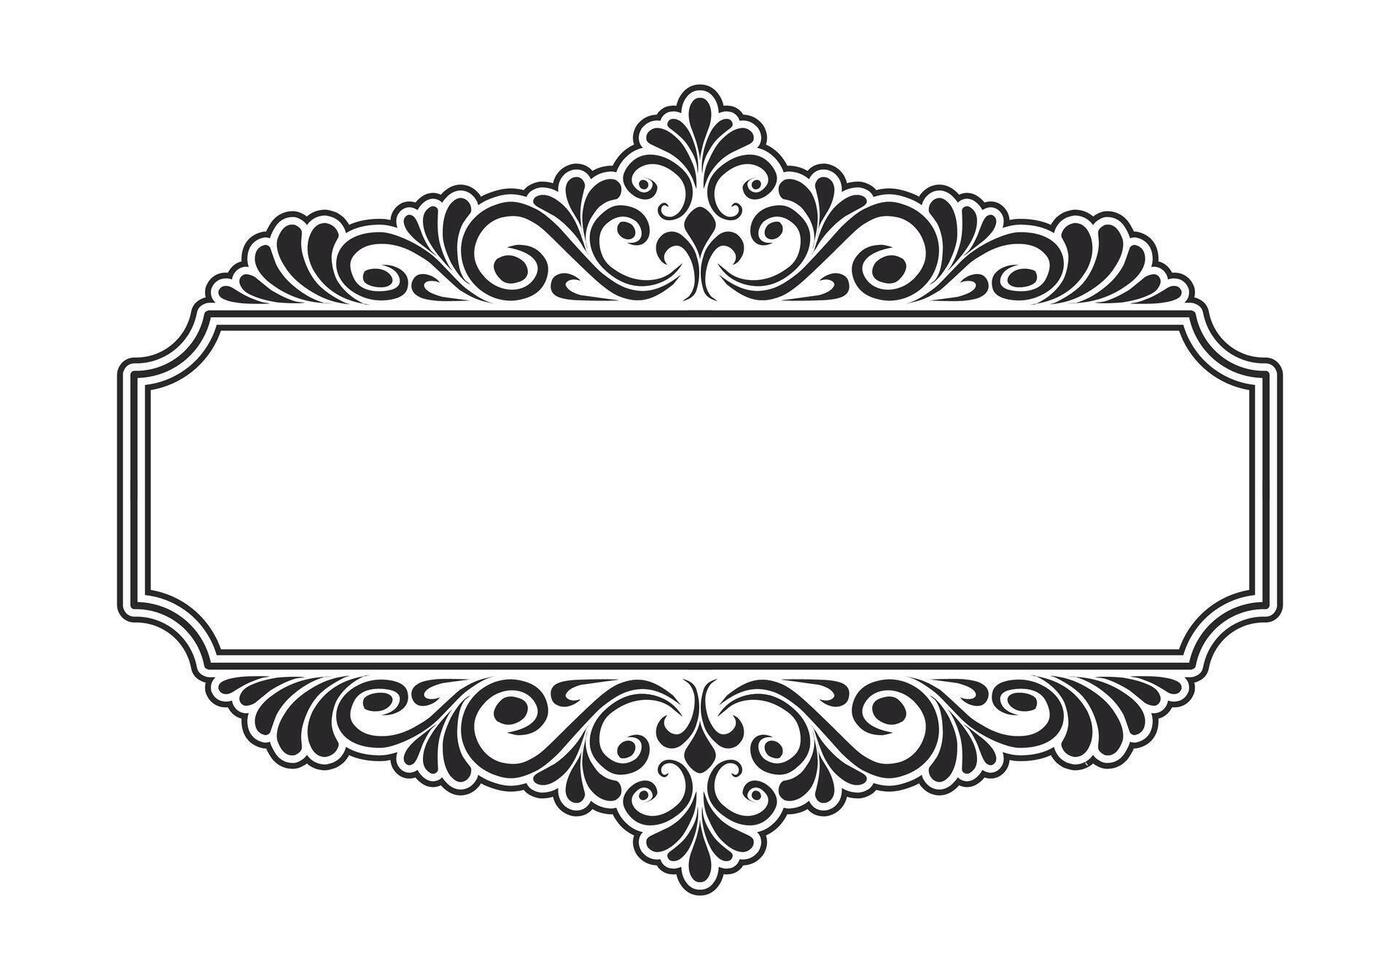 Classic name tags ornament floral border for weddings vector